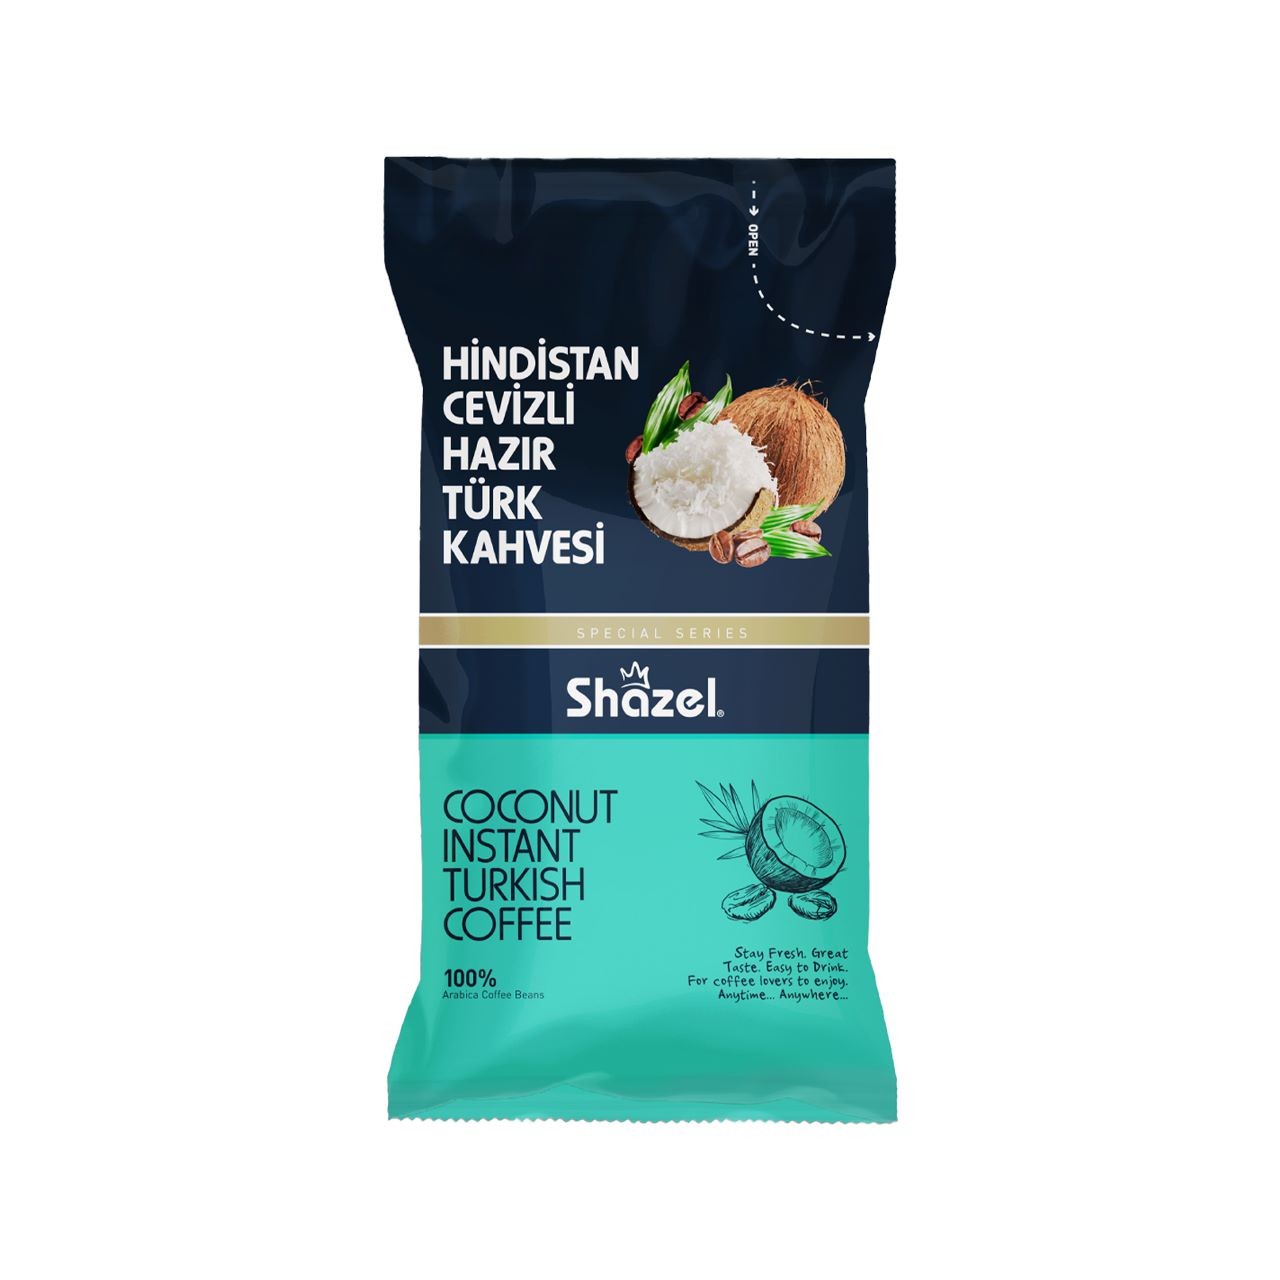 Shazel INSTANT TURKISH COFFEE WITH COCONUT OFFICE SET 12G